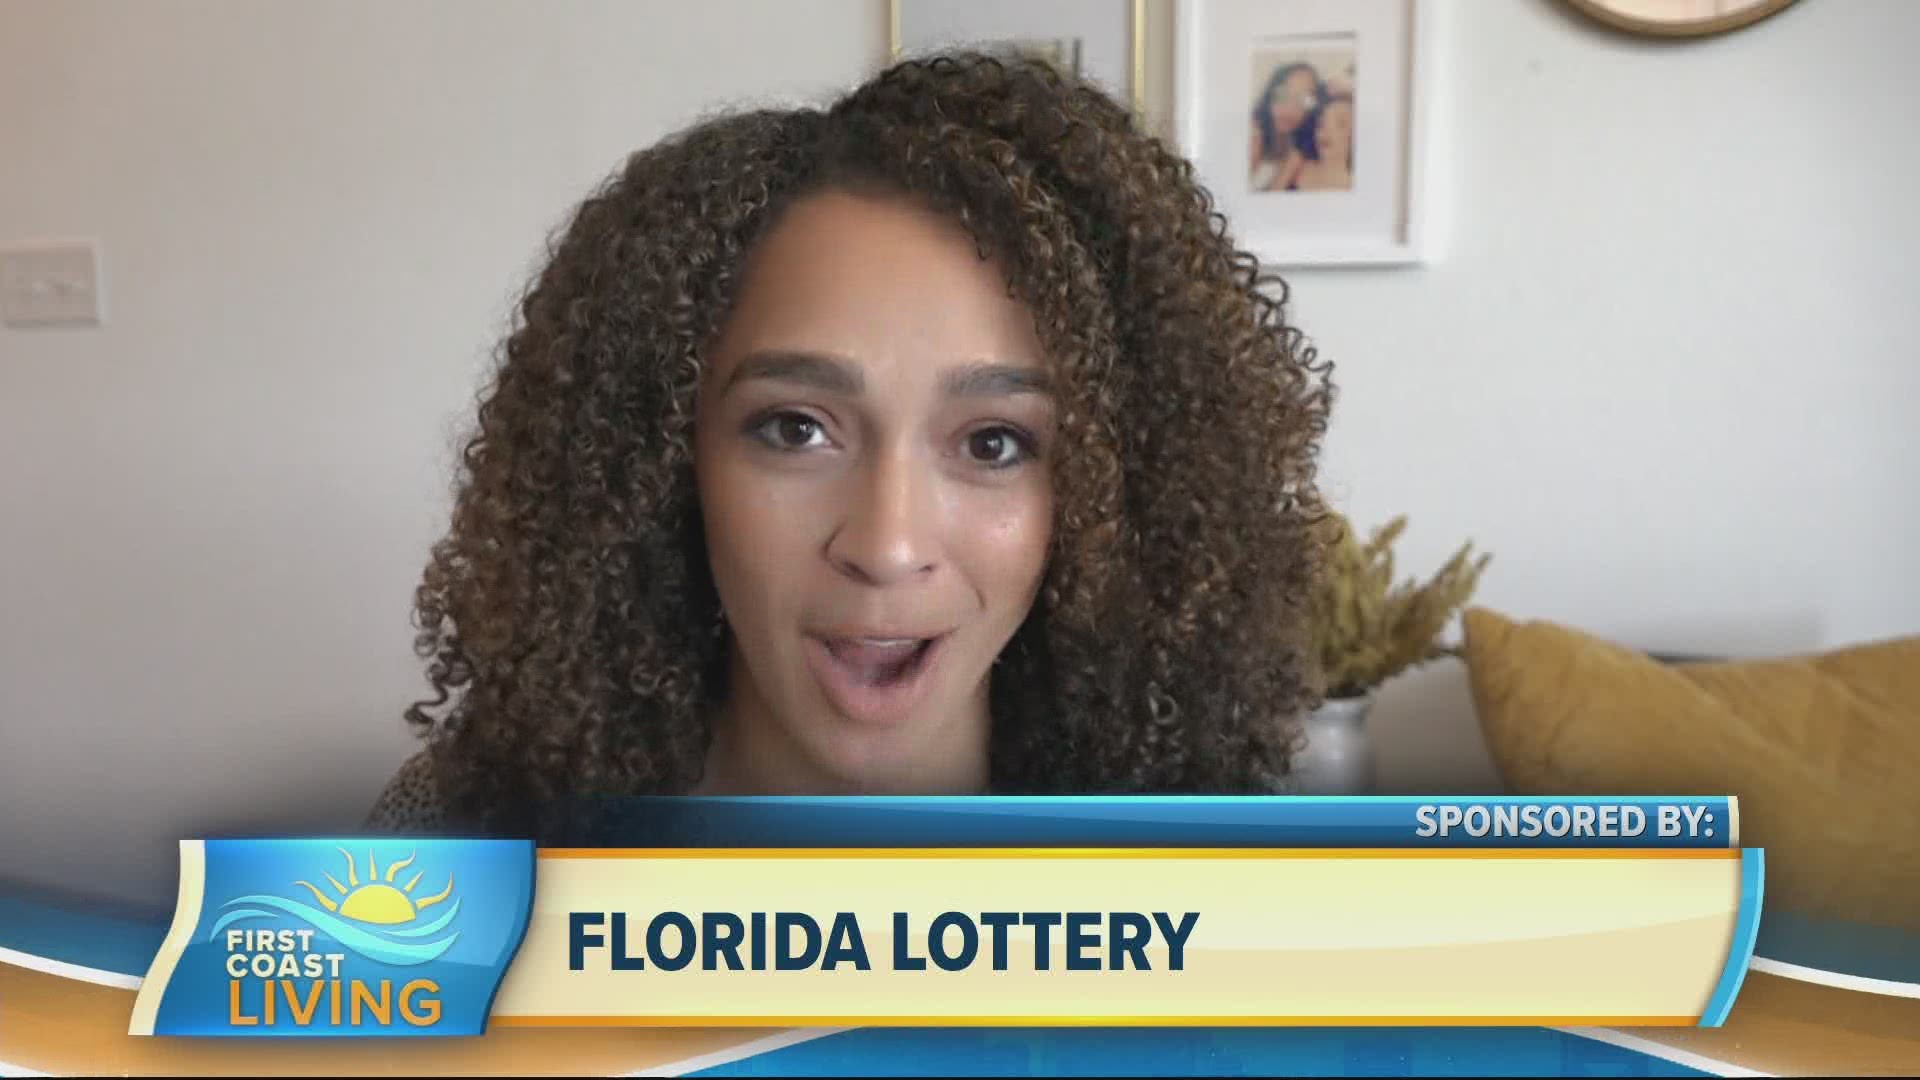 Florida Lottery games are designed to be a fun, low cost form of entertainment. Play responsibly.